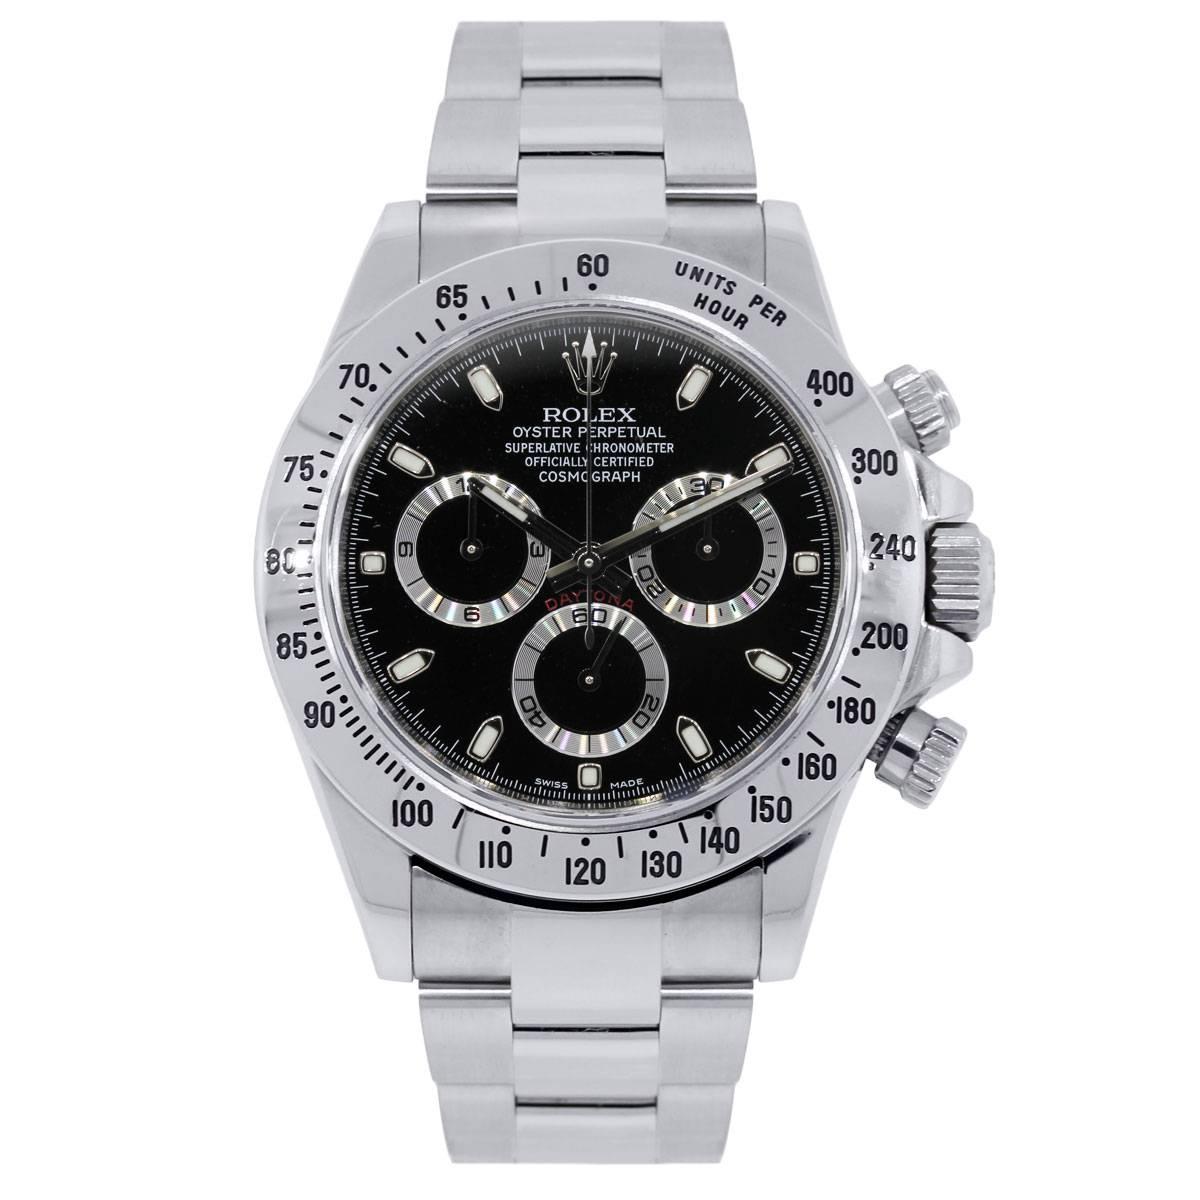 Brand: Rolex
Style: Daytona
MPN: 116520
Serial: Scrambled
Case Material: Stainless steel
Case Diameter: 40mm
Bezel: Stainless steel engraved bezel
Dial: Black Cosmograph dial
Bracelet: Stainless steel oyster band
Crystal: Sapphire
Size: